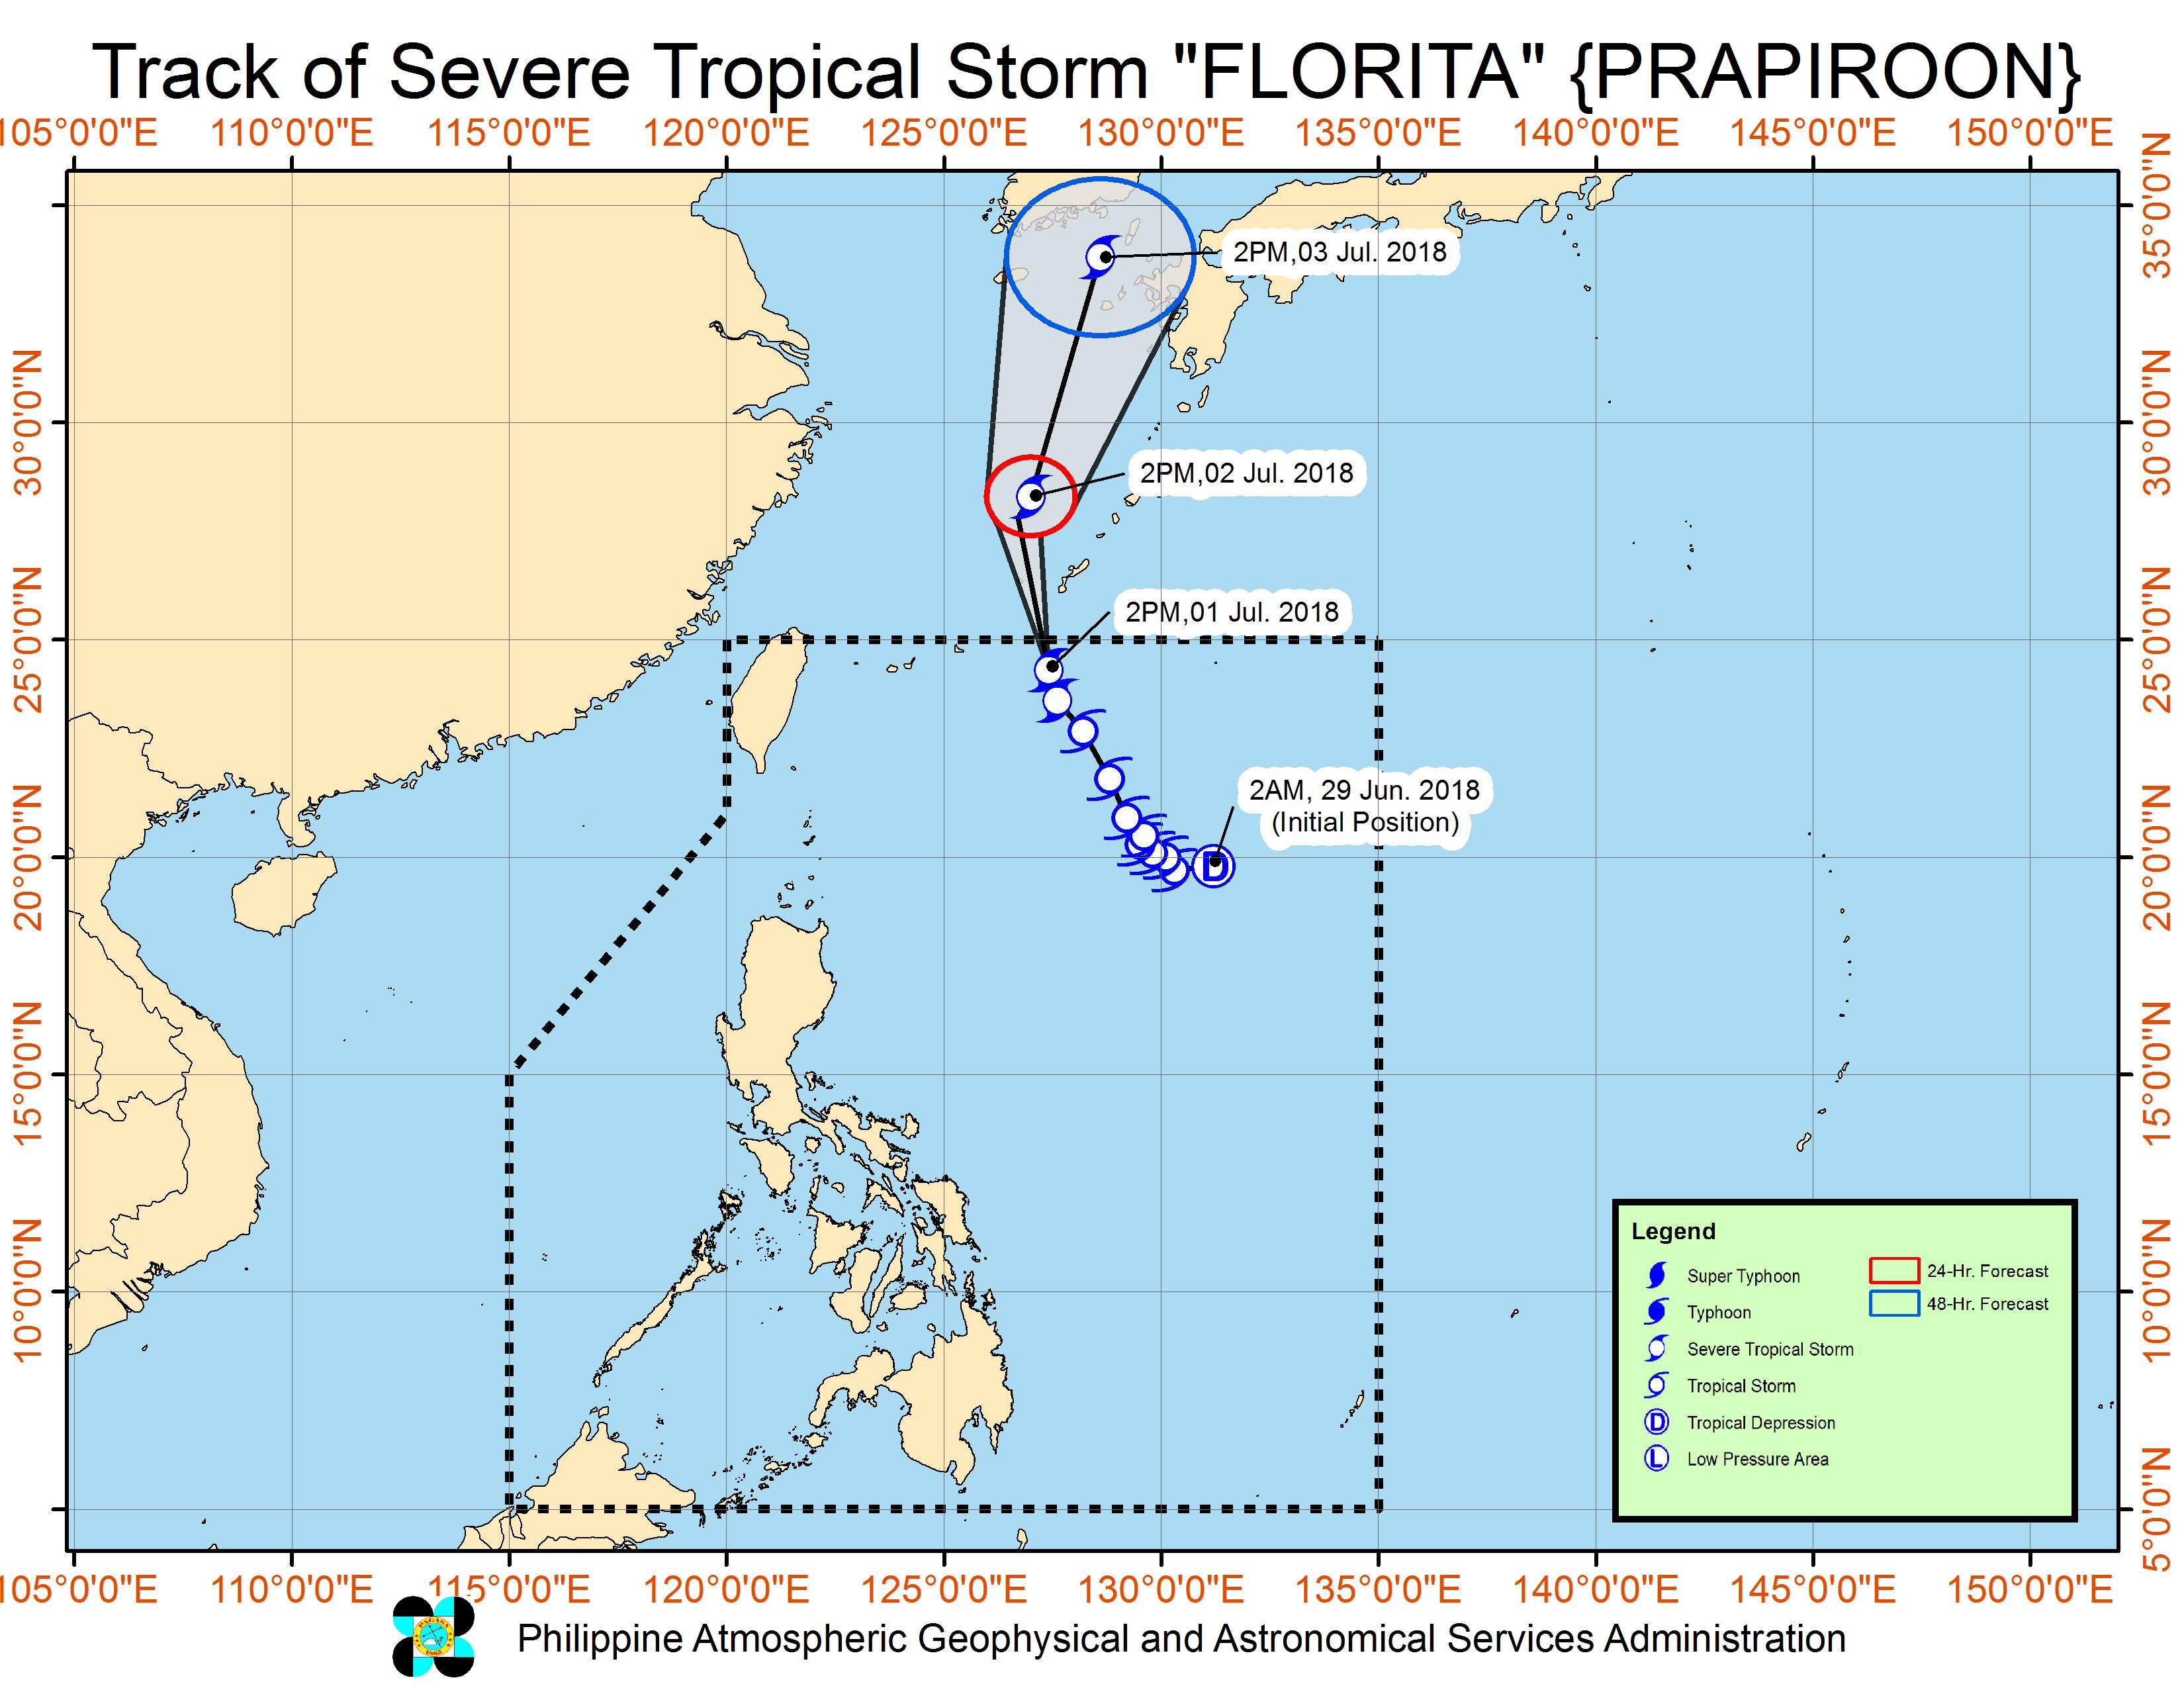 Forecast track of Severe Tropical Storm Florita (Prapiroon) as of July 1, 2018, 5:30 pm. Image courtesy of PAGASA 